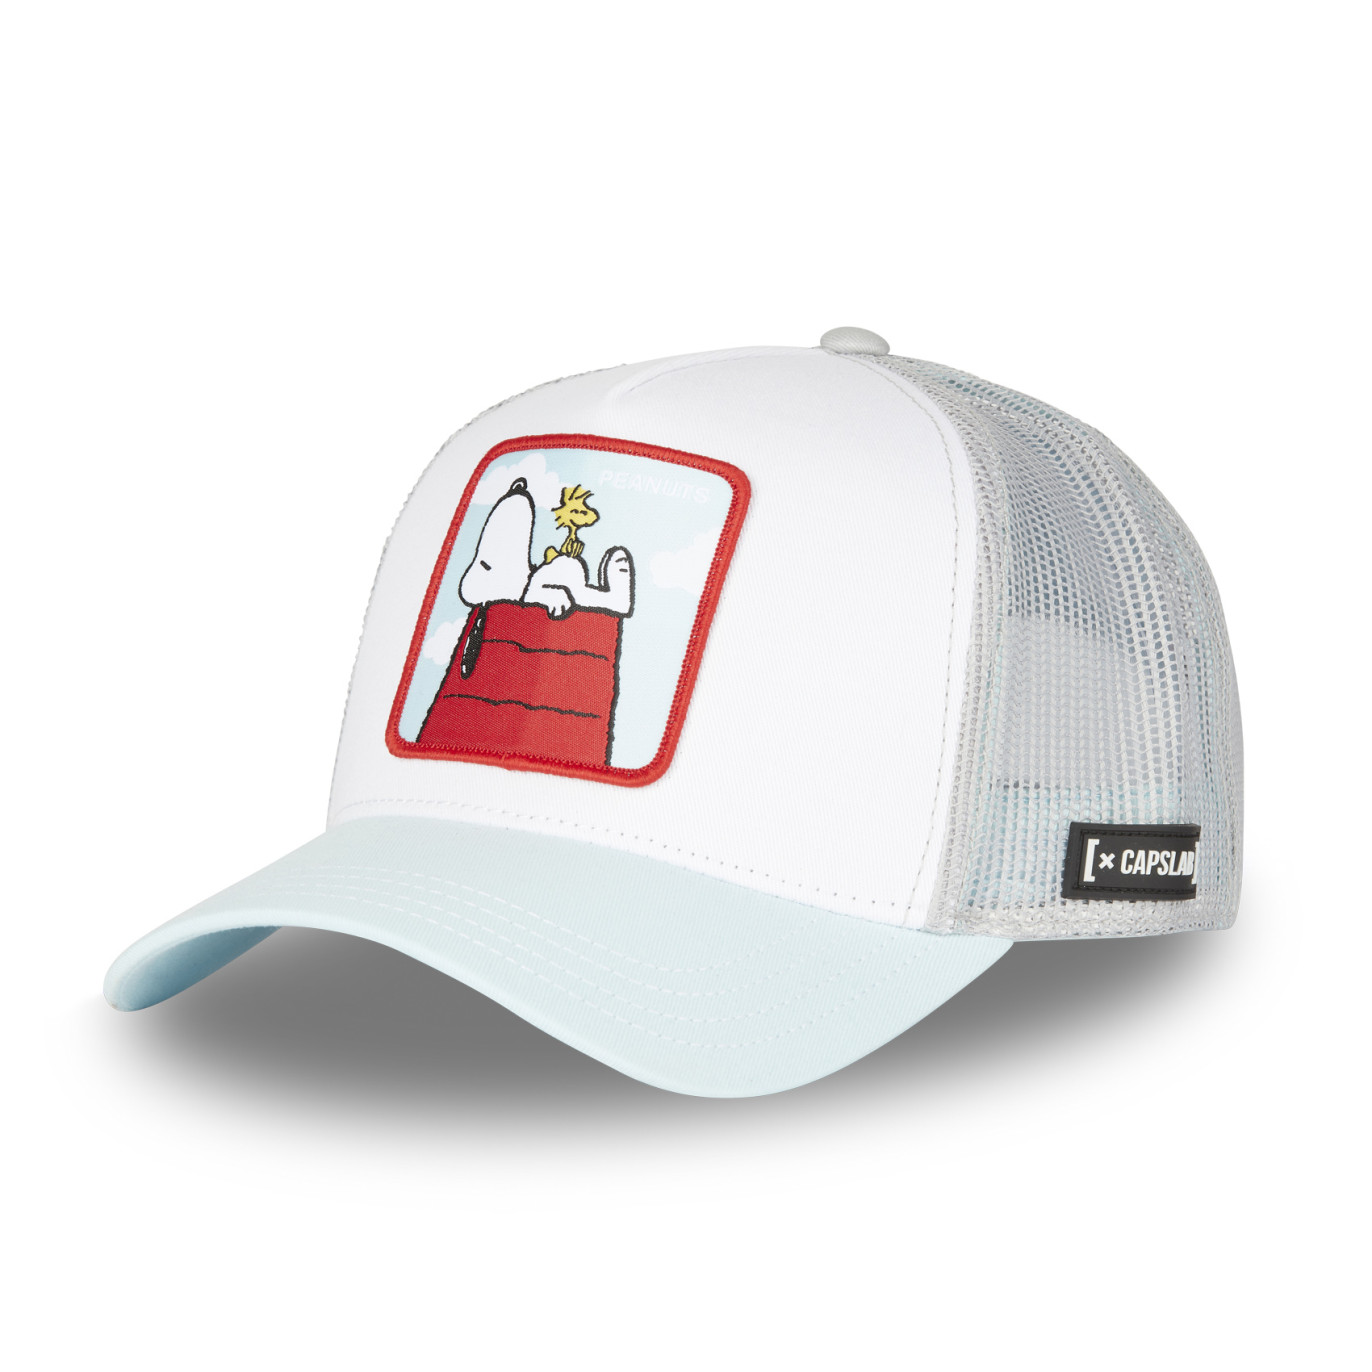 Casquette homme trucker Peanuts Snoopy Capslab Capslab - 1